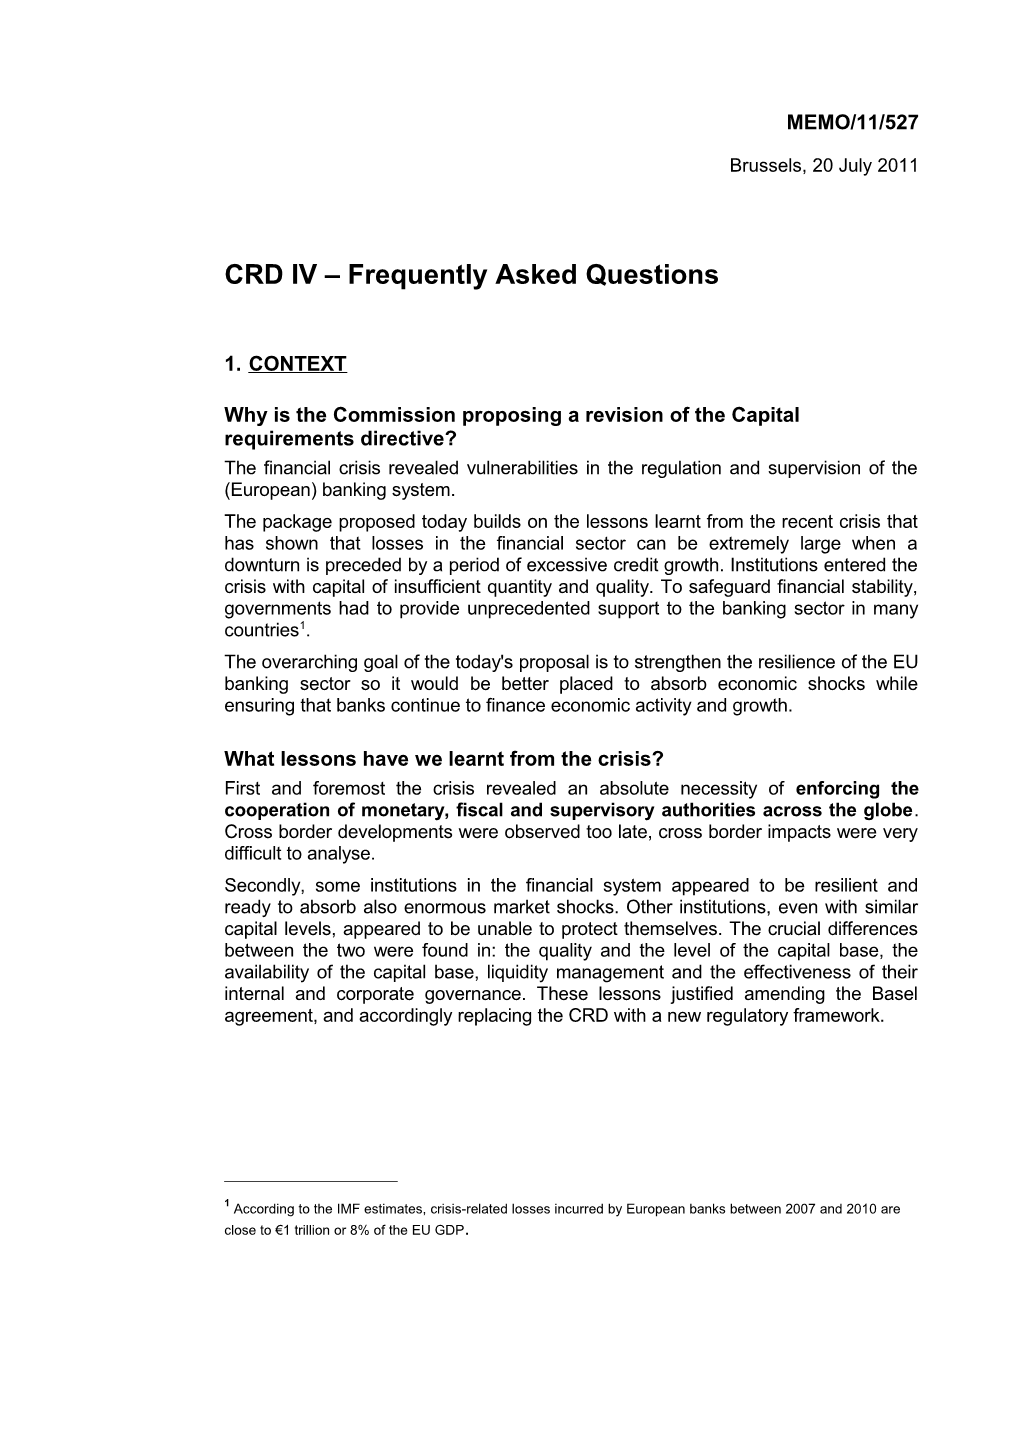 CRD IV Frequently Asked Questions